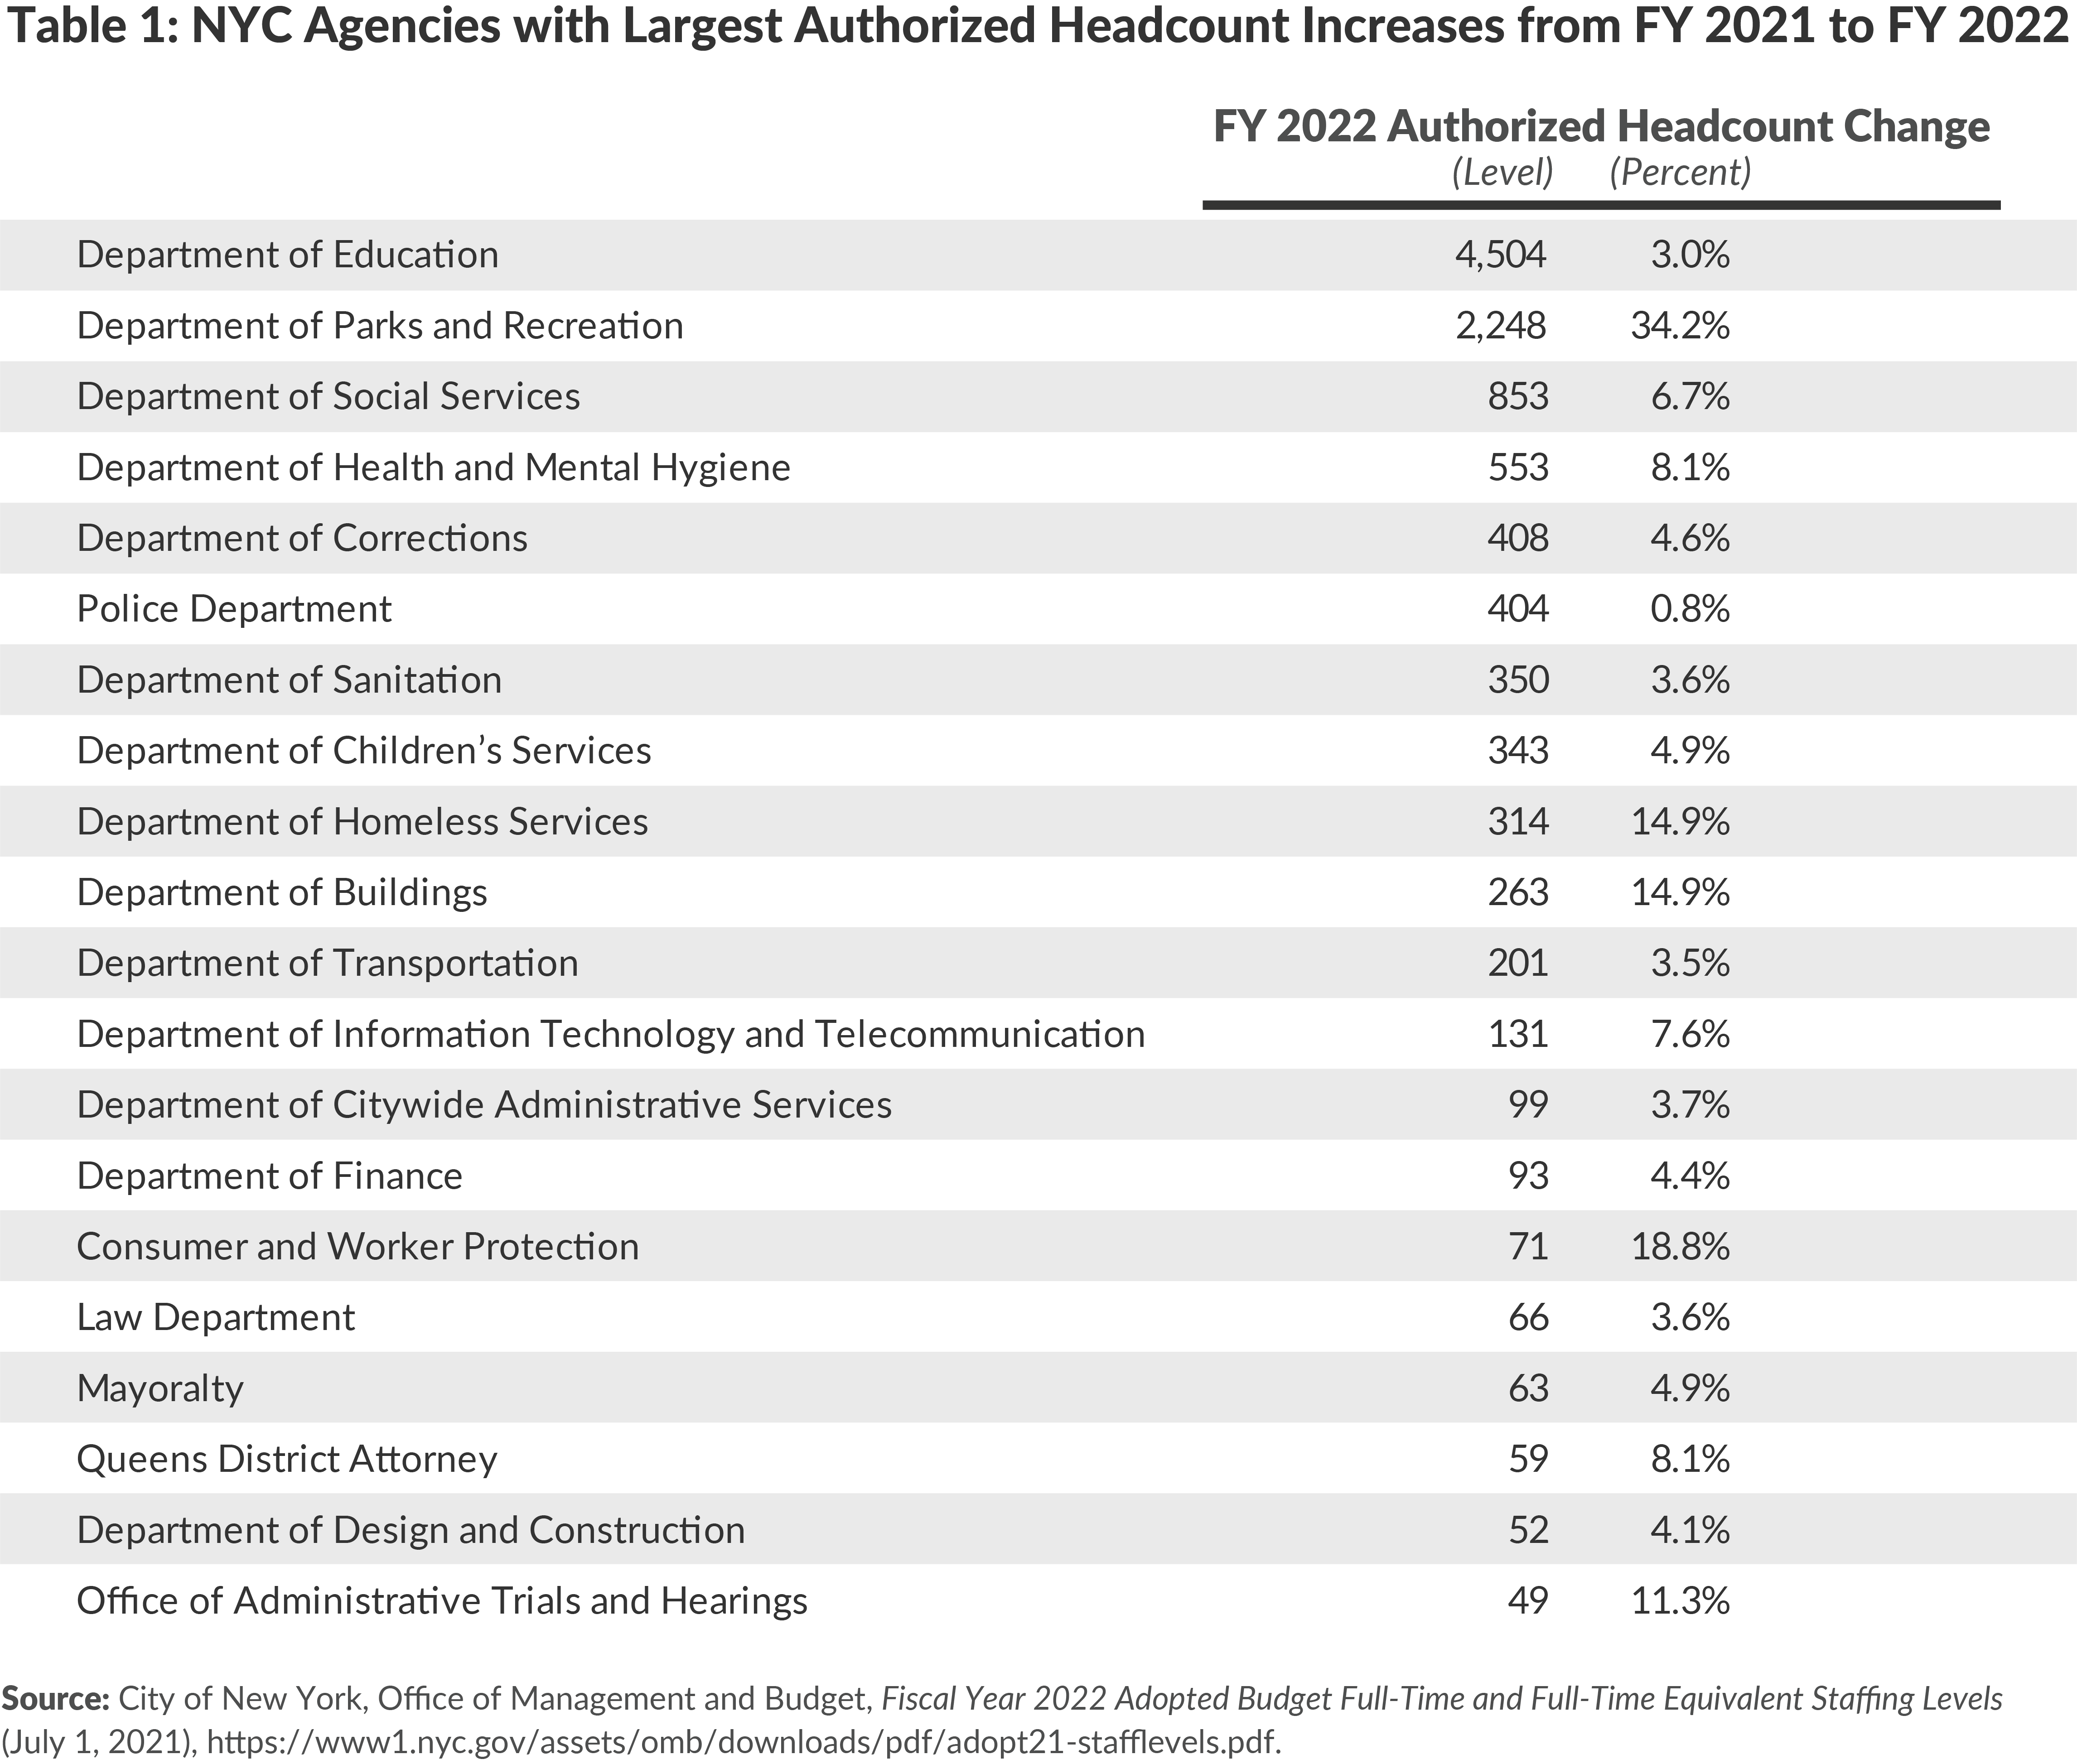 Table 1. NYC Agencies with Highest Authorized Headcount Increases from FY2021 to FY2022